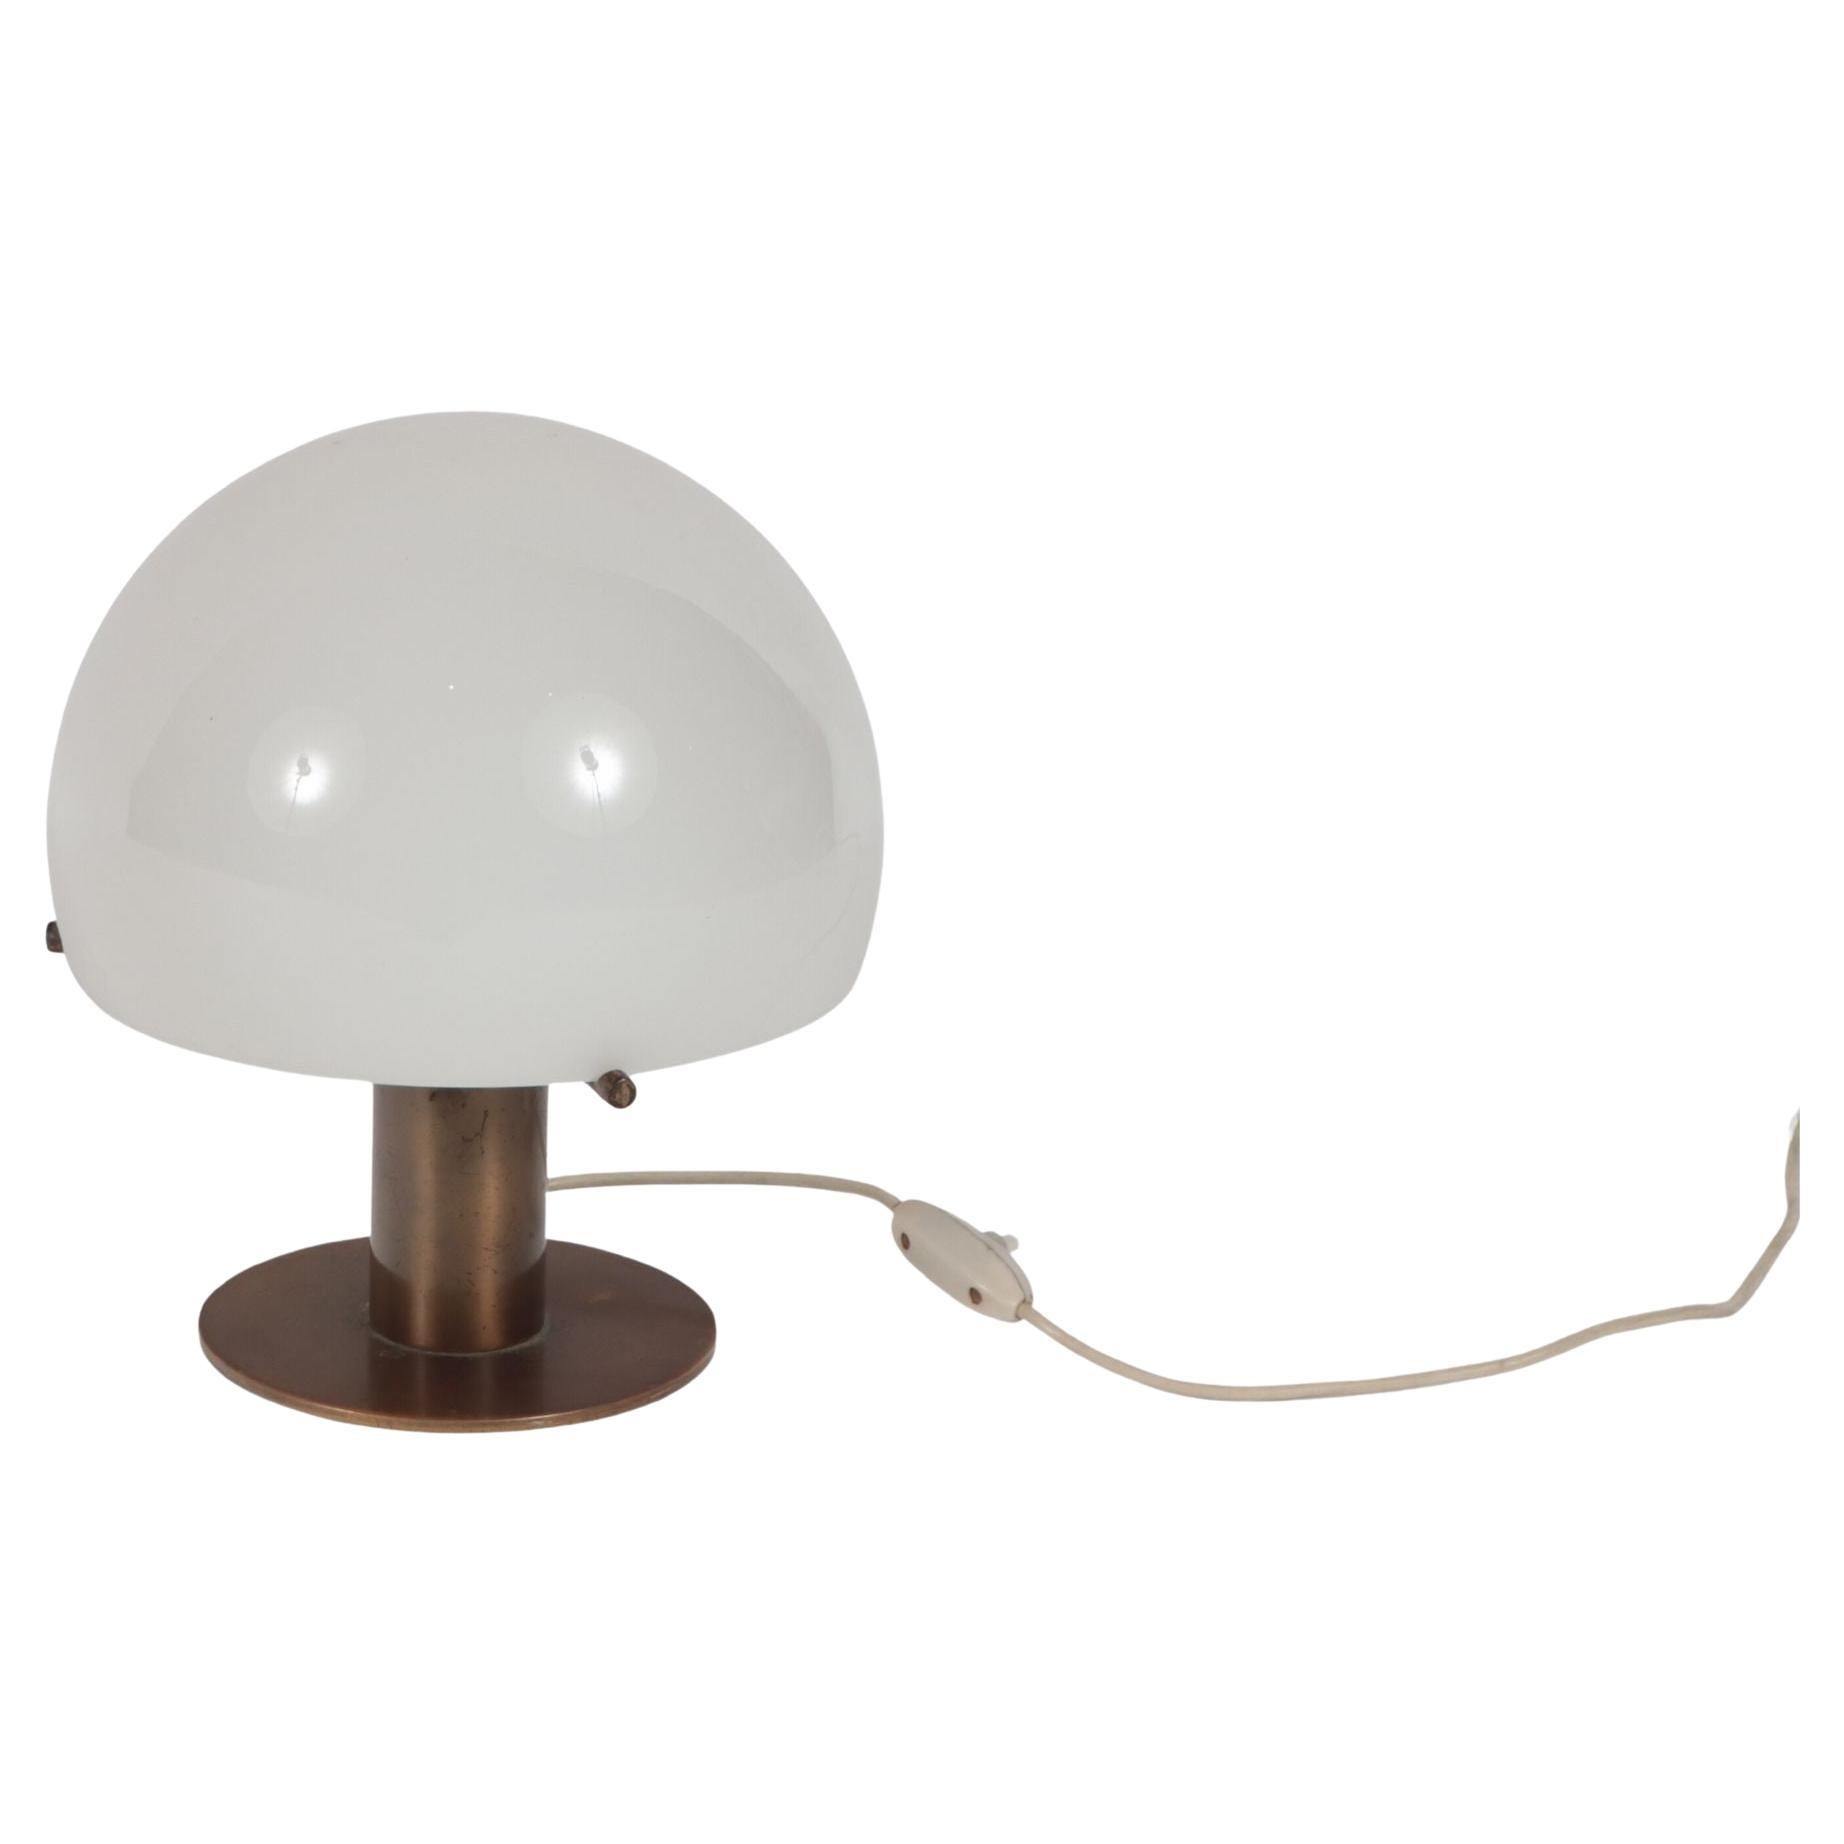 Italian Mid-Century Modern Bronze and Glass Table Lamp, circa 1950 For Sale